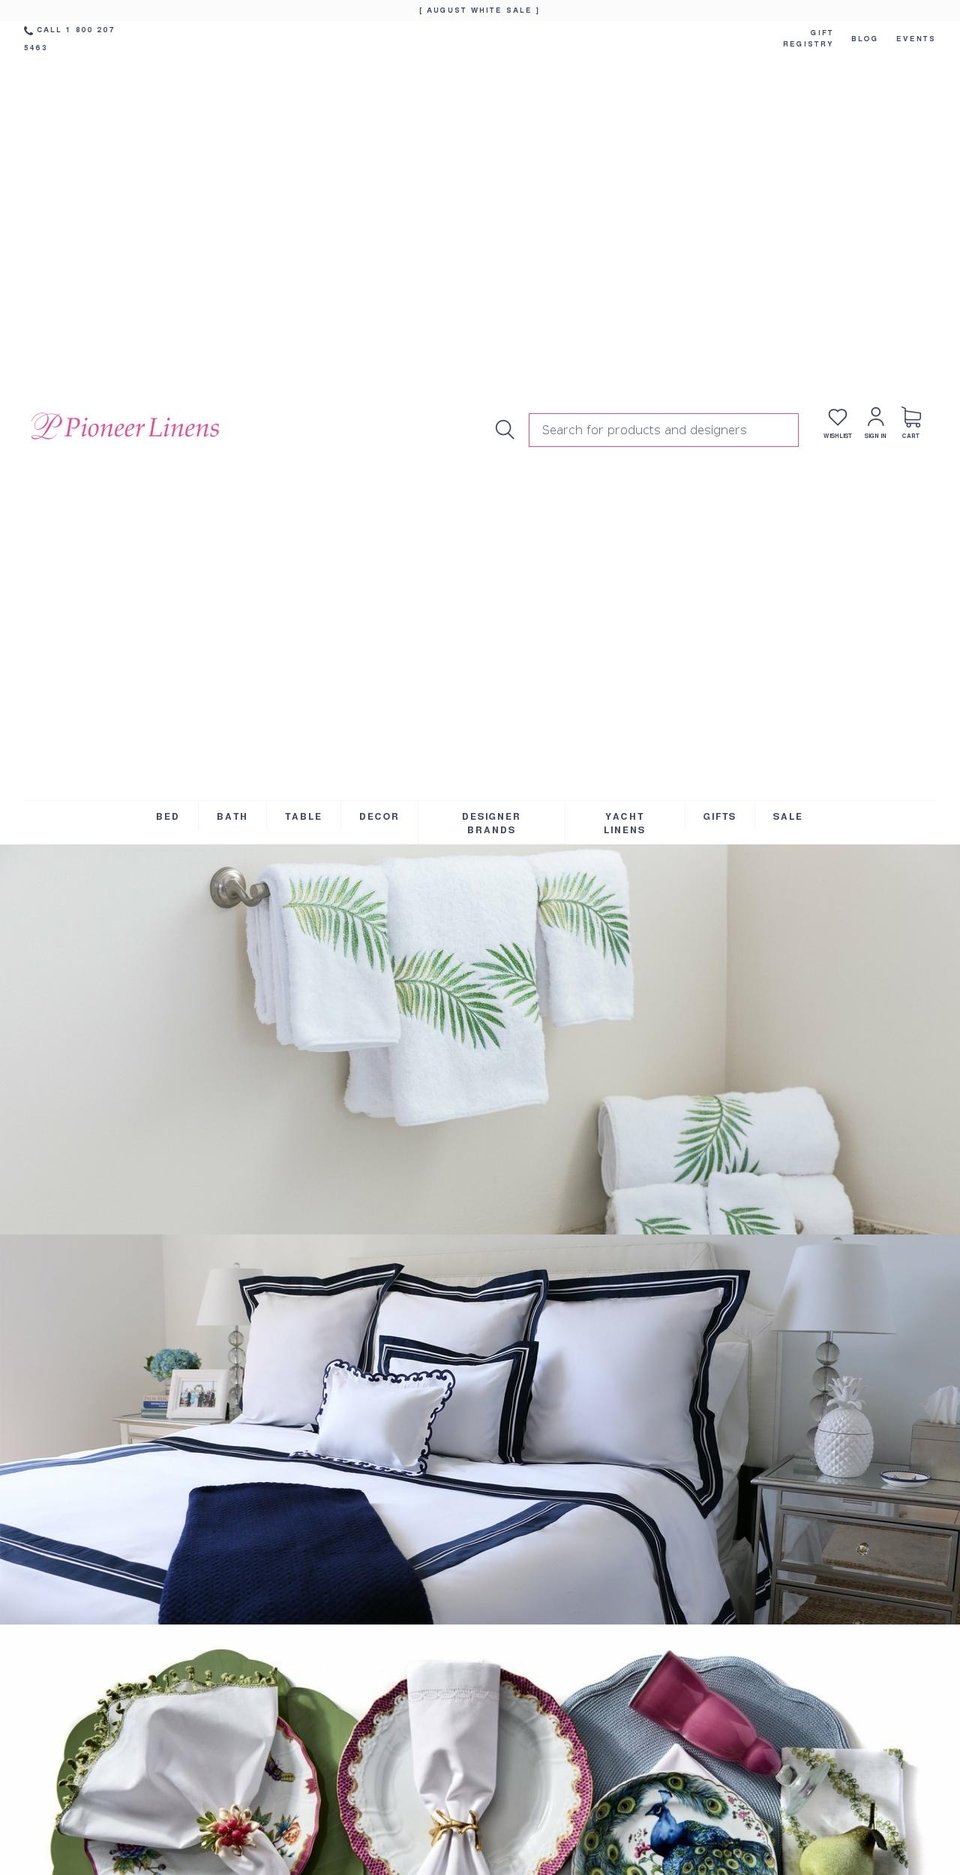 Buko Shopify Theme - Products Consolidation Shopify theme site example mpioneerlinen.info